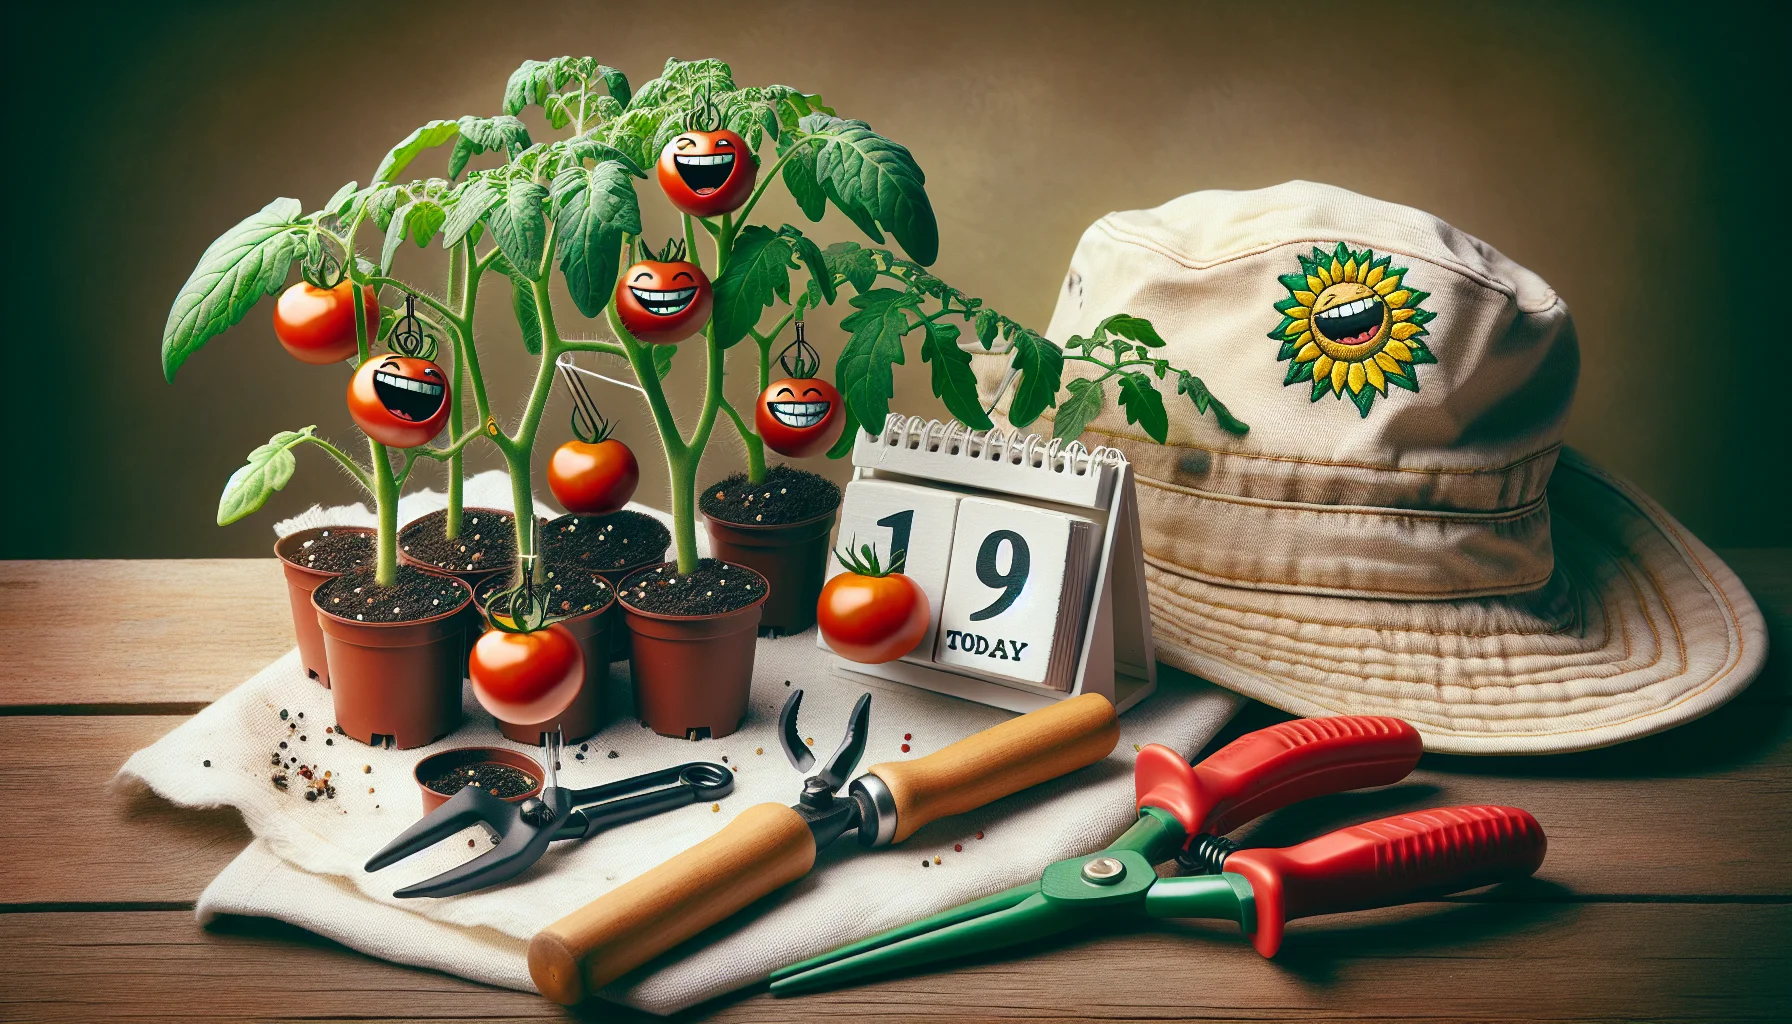 Craft an amusing image that showcases the best time to start growing tomatoes indoors. In this jovial scene, a few tomato plants are equipped with tiny comical calenders, showing that it's time to start sowing. The plants are surrounded by standard indoor-gardening tools for context. The vibrant green leaves and red tomatoes on the plants are surrounded with a joyful atmosphere with subtle indications of laughter, like a gardening hat with a chuckling sunflower emblem, to encourage people's interest in gardening.